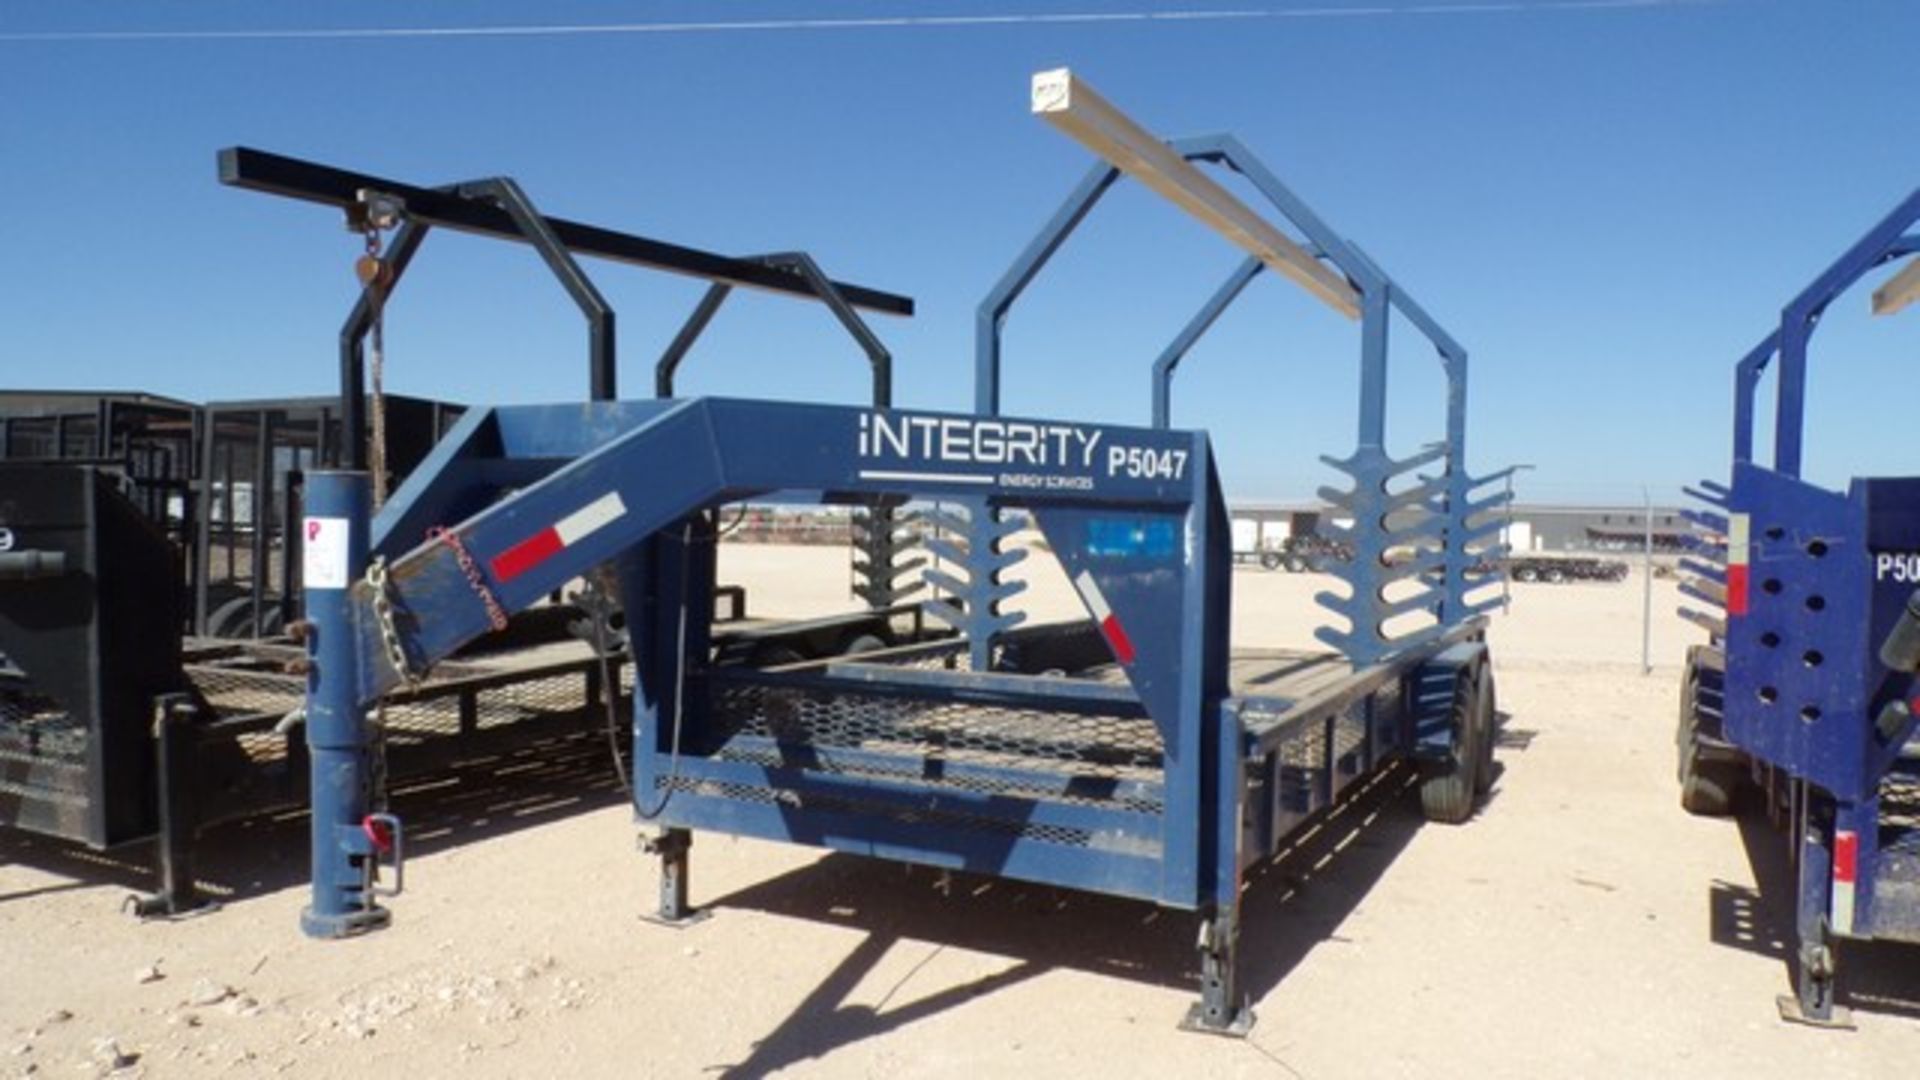 Located in YARD 1 - Midland, TX (P5047) (2358) (X) 2019 PULL DO T/A COMBO MONORAIL/ TOOL TRAILER, - Bild 2 aus 4